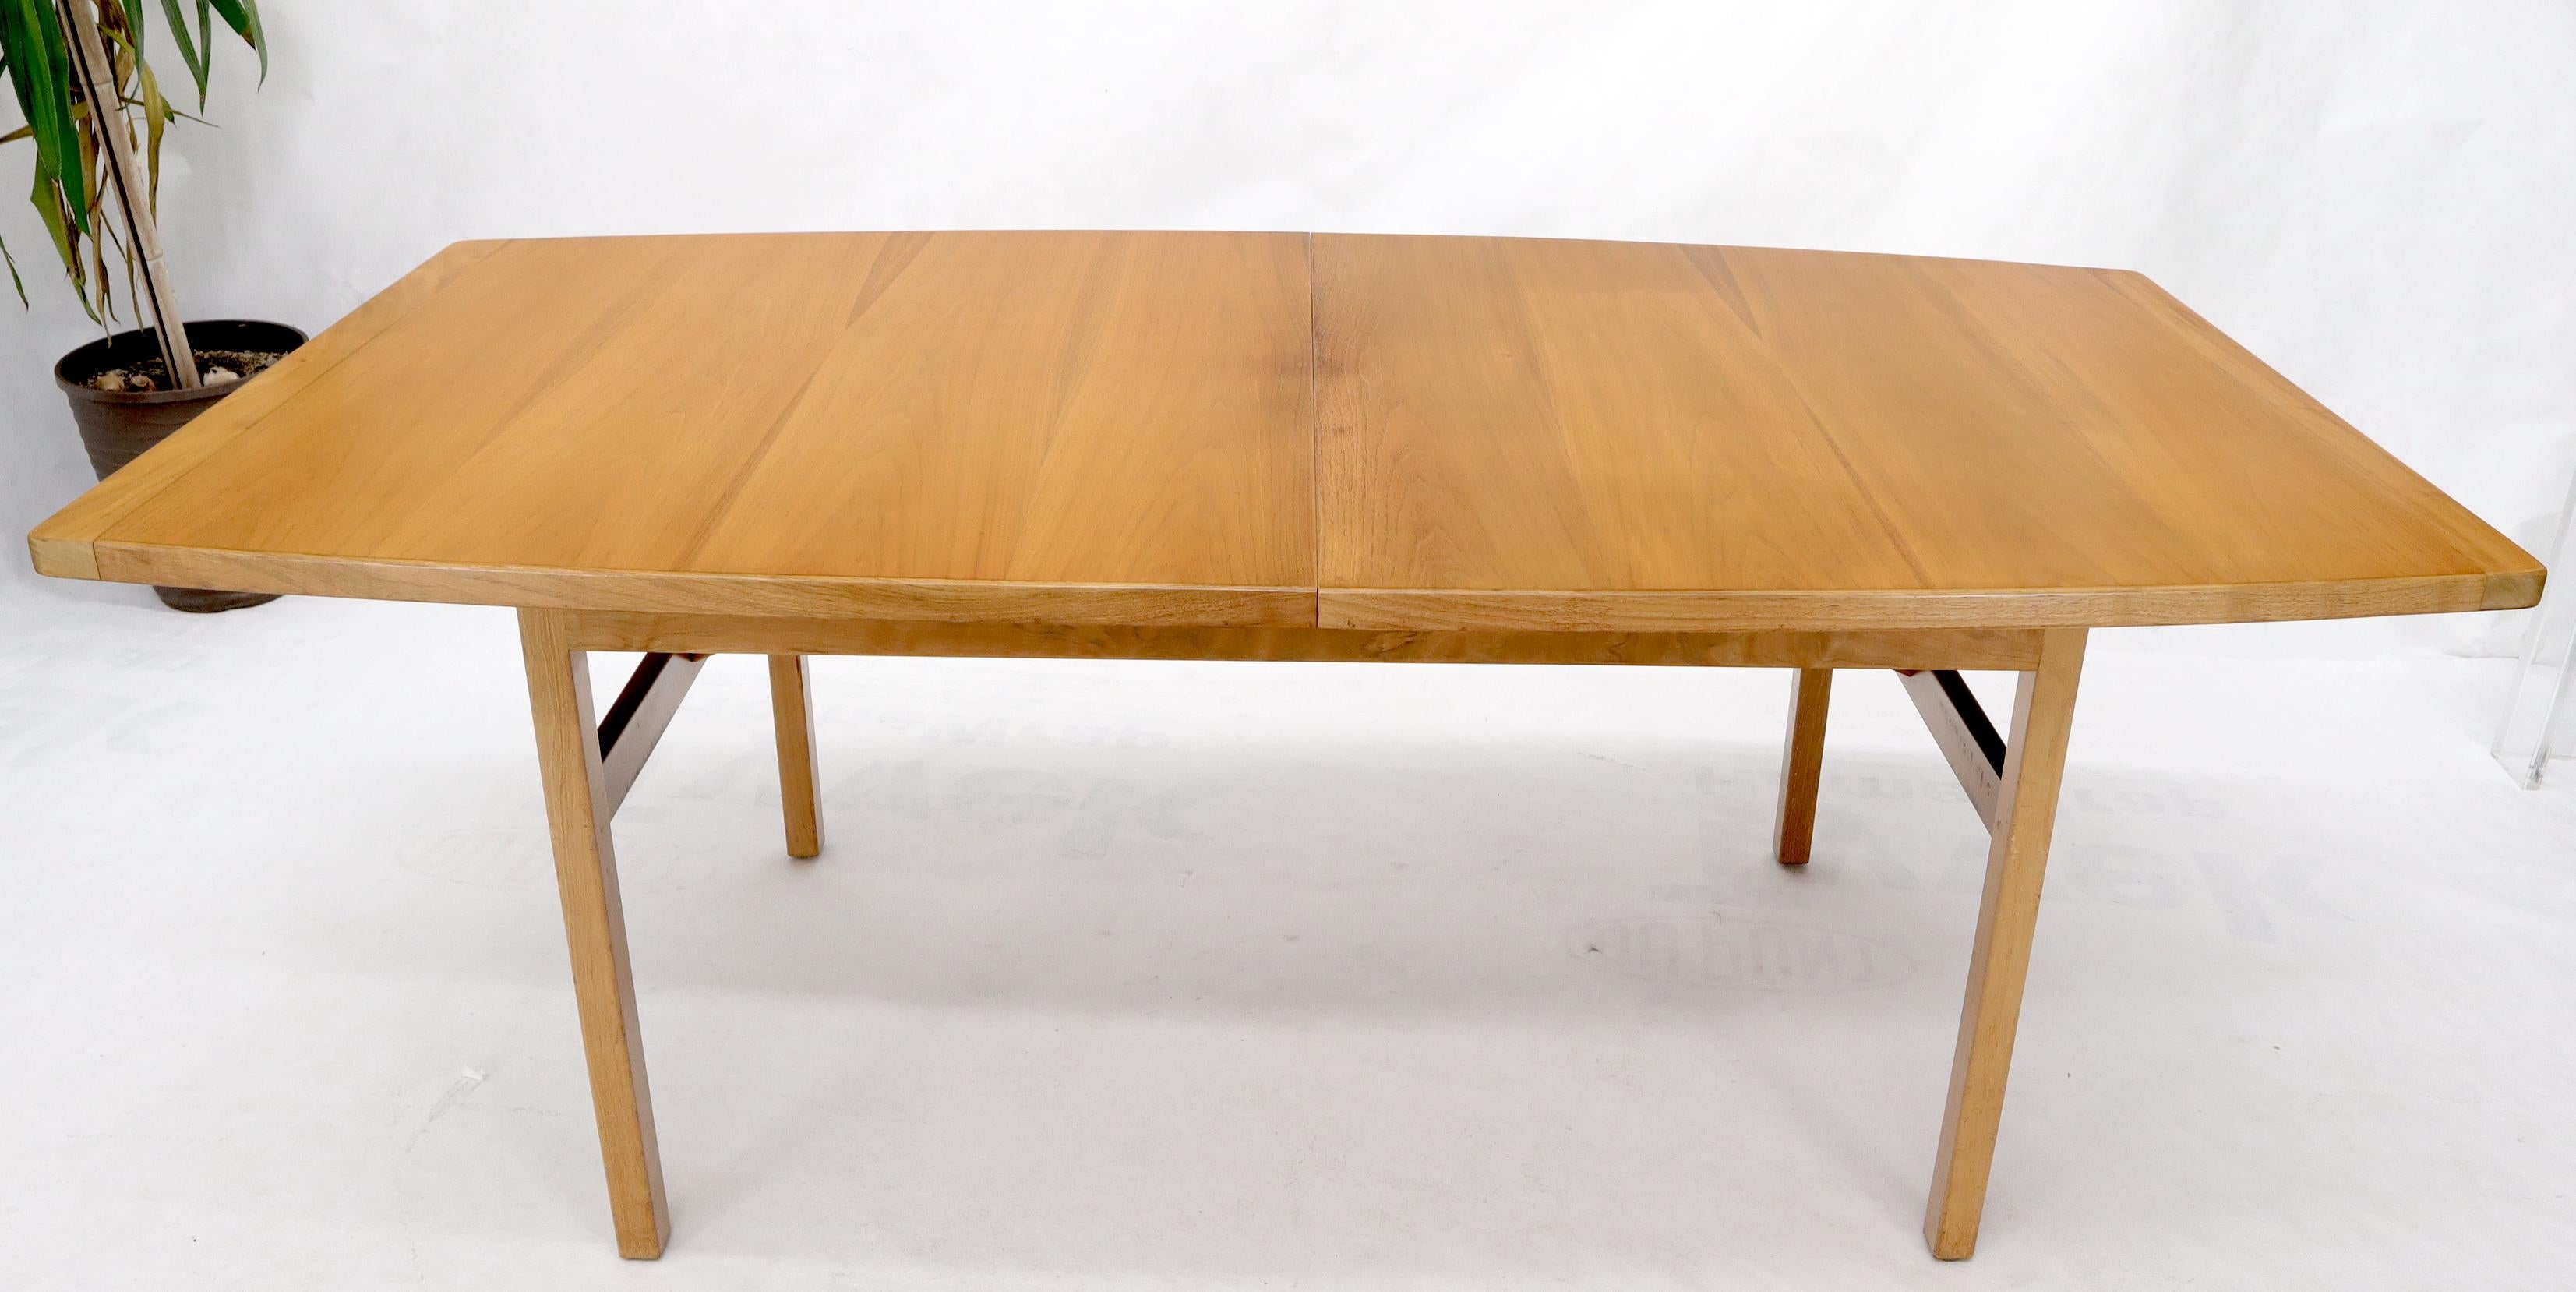 20th Century Jens Risom Walnut Gate Leg Dining Table with Extensions Boards